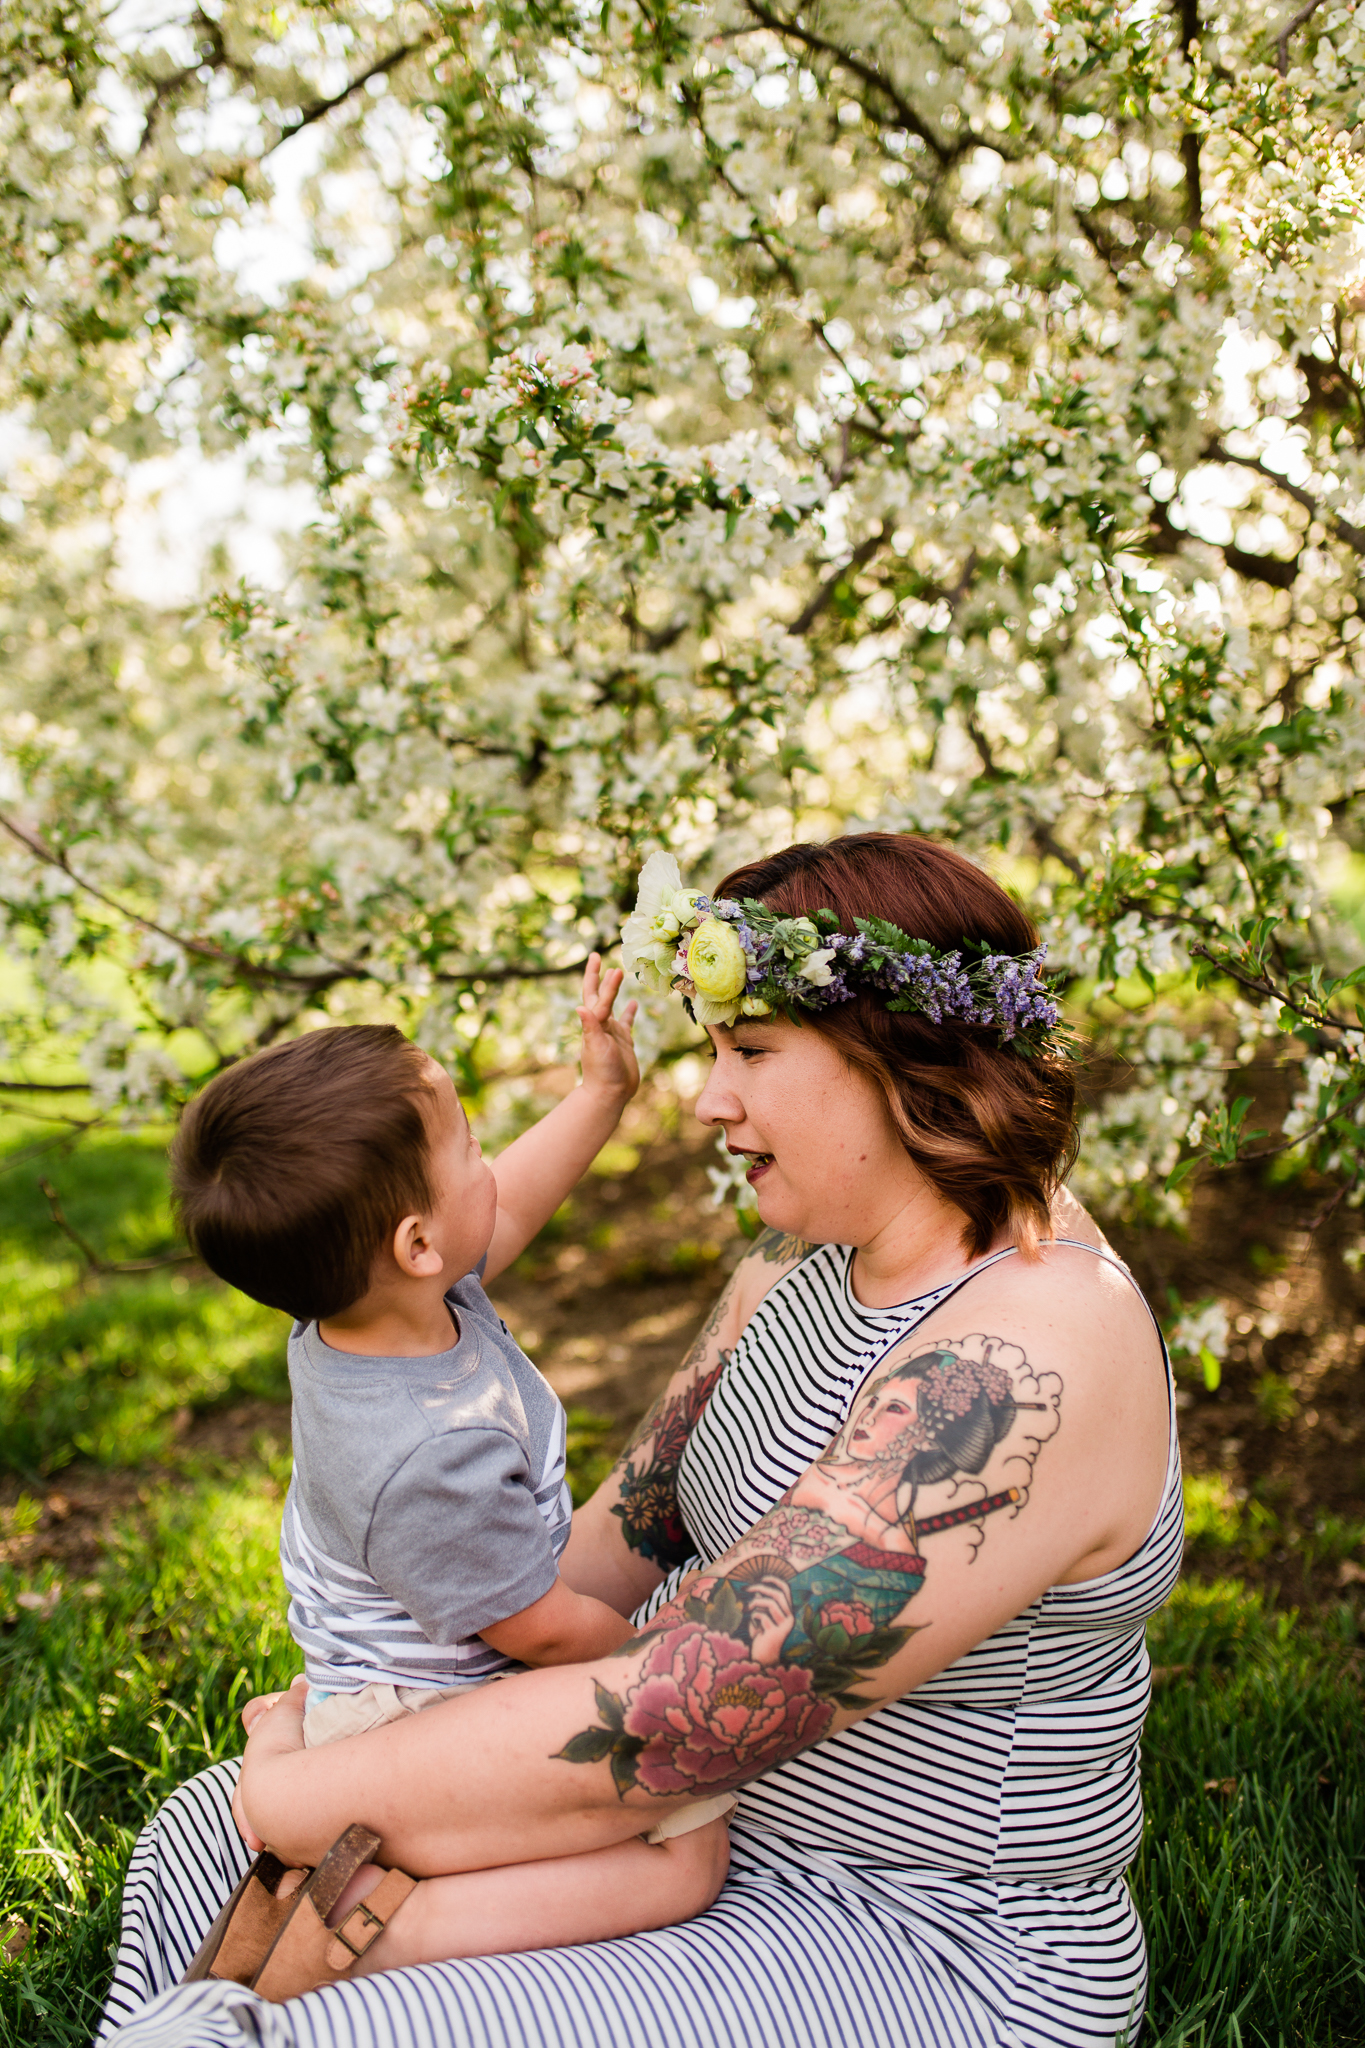  Little boy touches his mother's flower crown, spring mommy and me mini session at Loose Park, Rebecca Clair Photography 